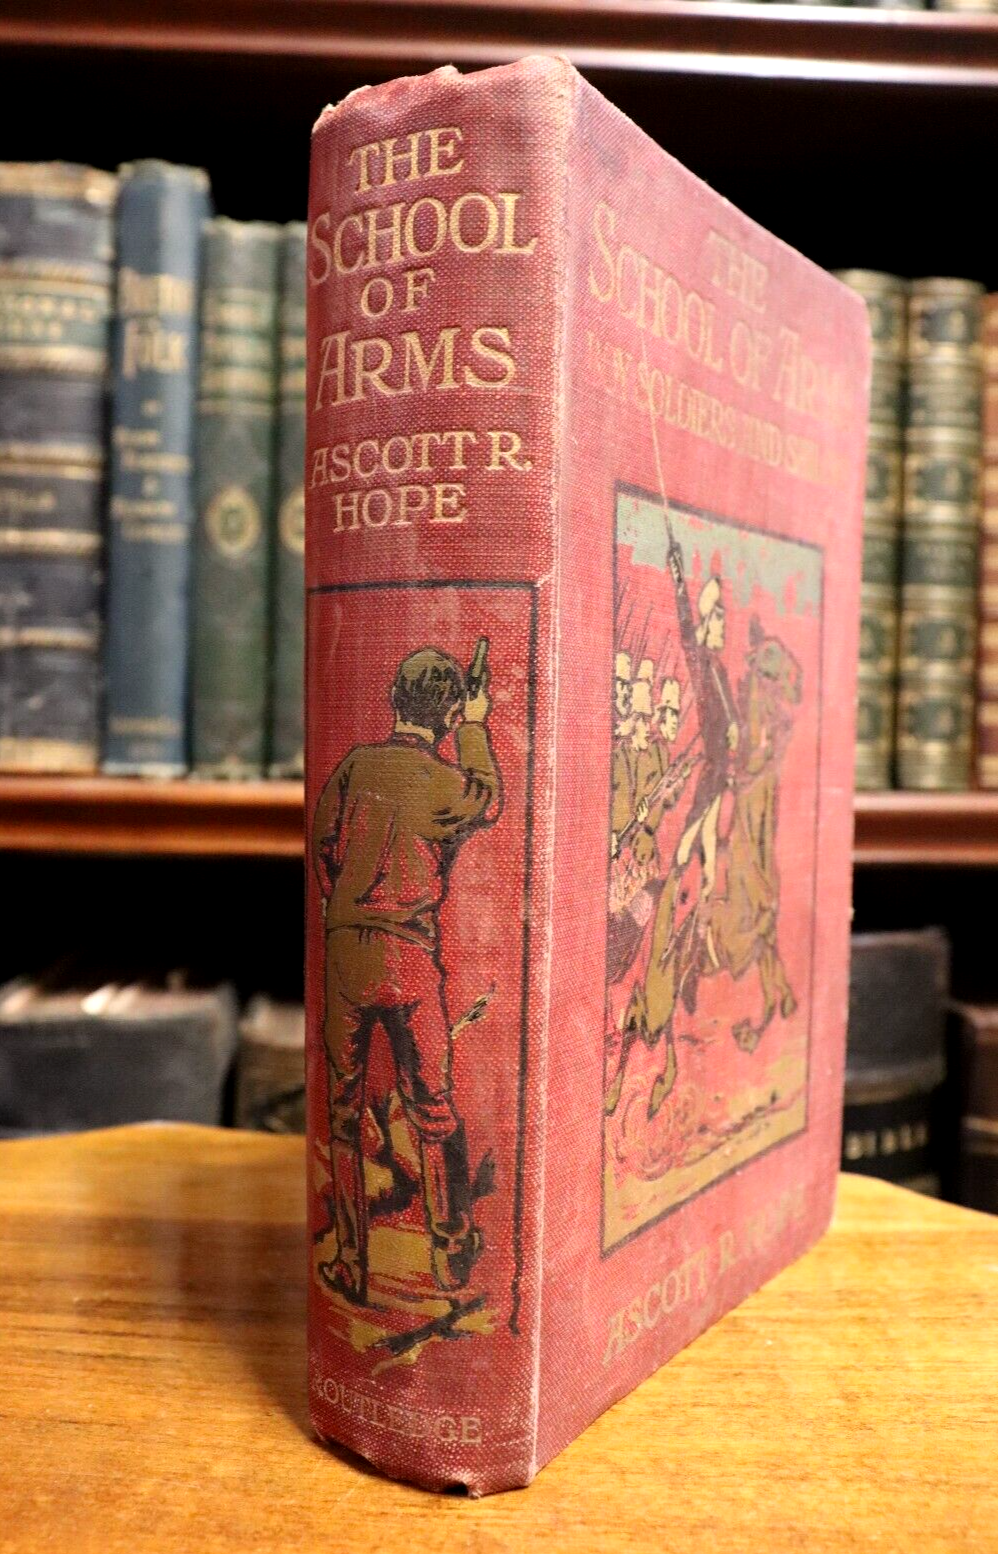 The School Of Arms by Ascot R. Hope - c1920 - Antique Literature Book